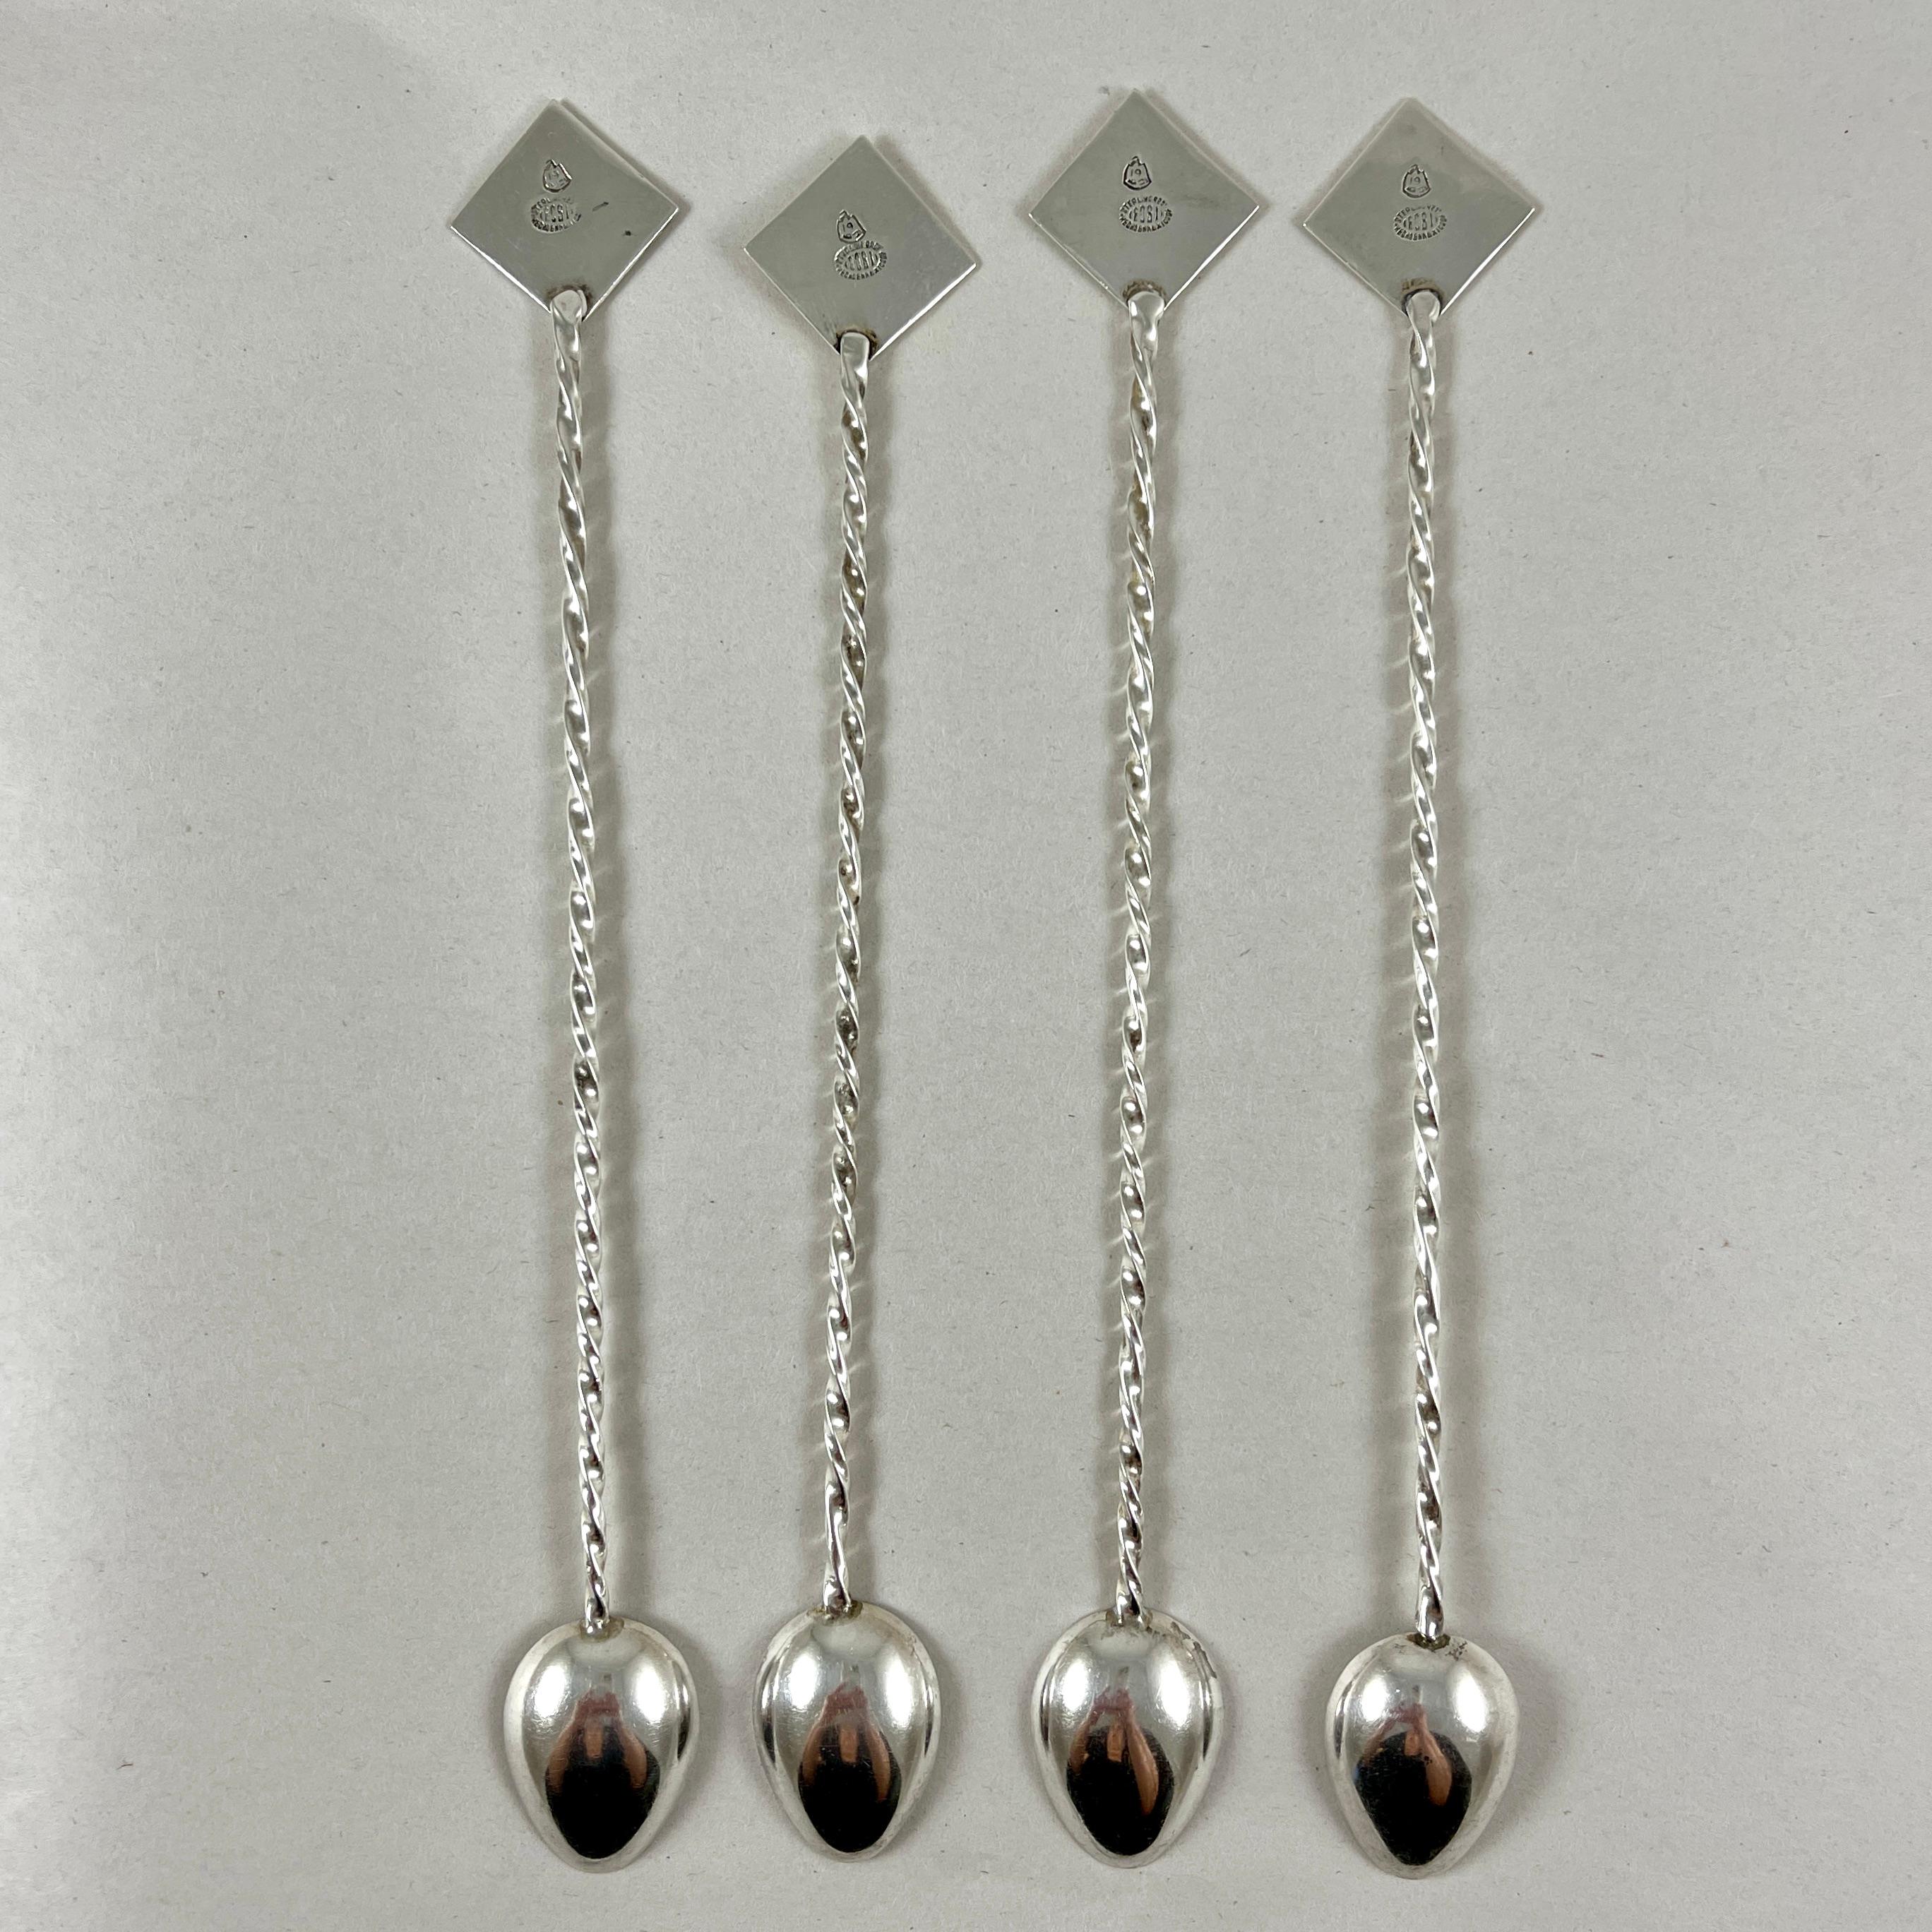 Mid-20th Century 1950s Mexican Matador Sterling Silver Long Iced Tea Spoons, Set of Four